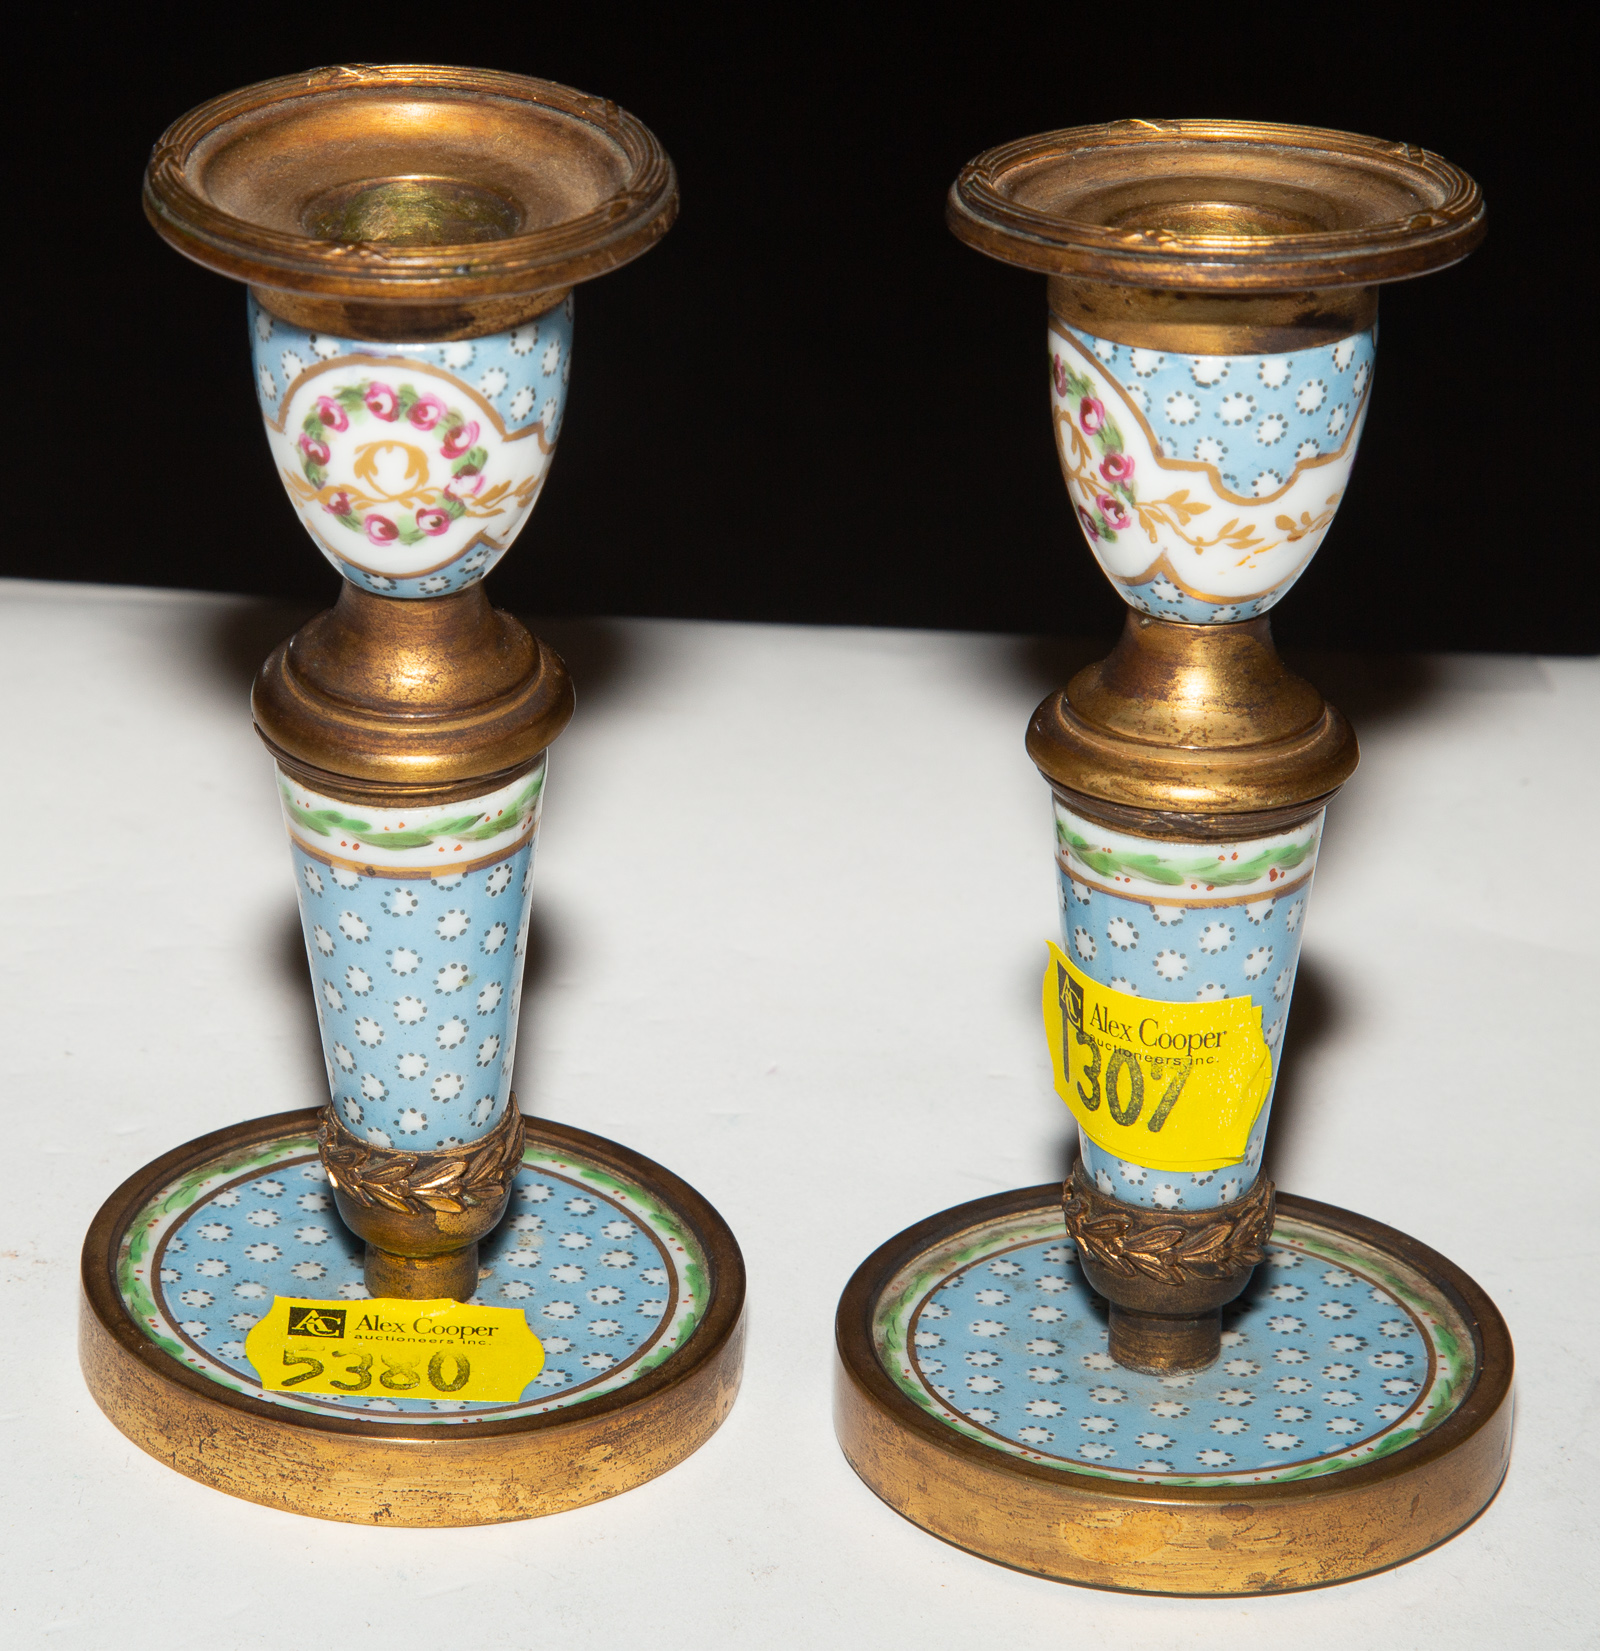 PAIR OF SEVRES STYLE PORCELAIN